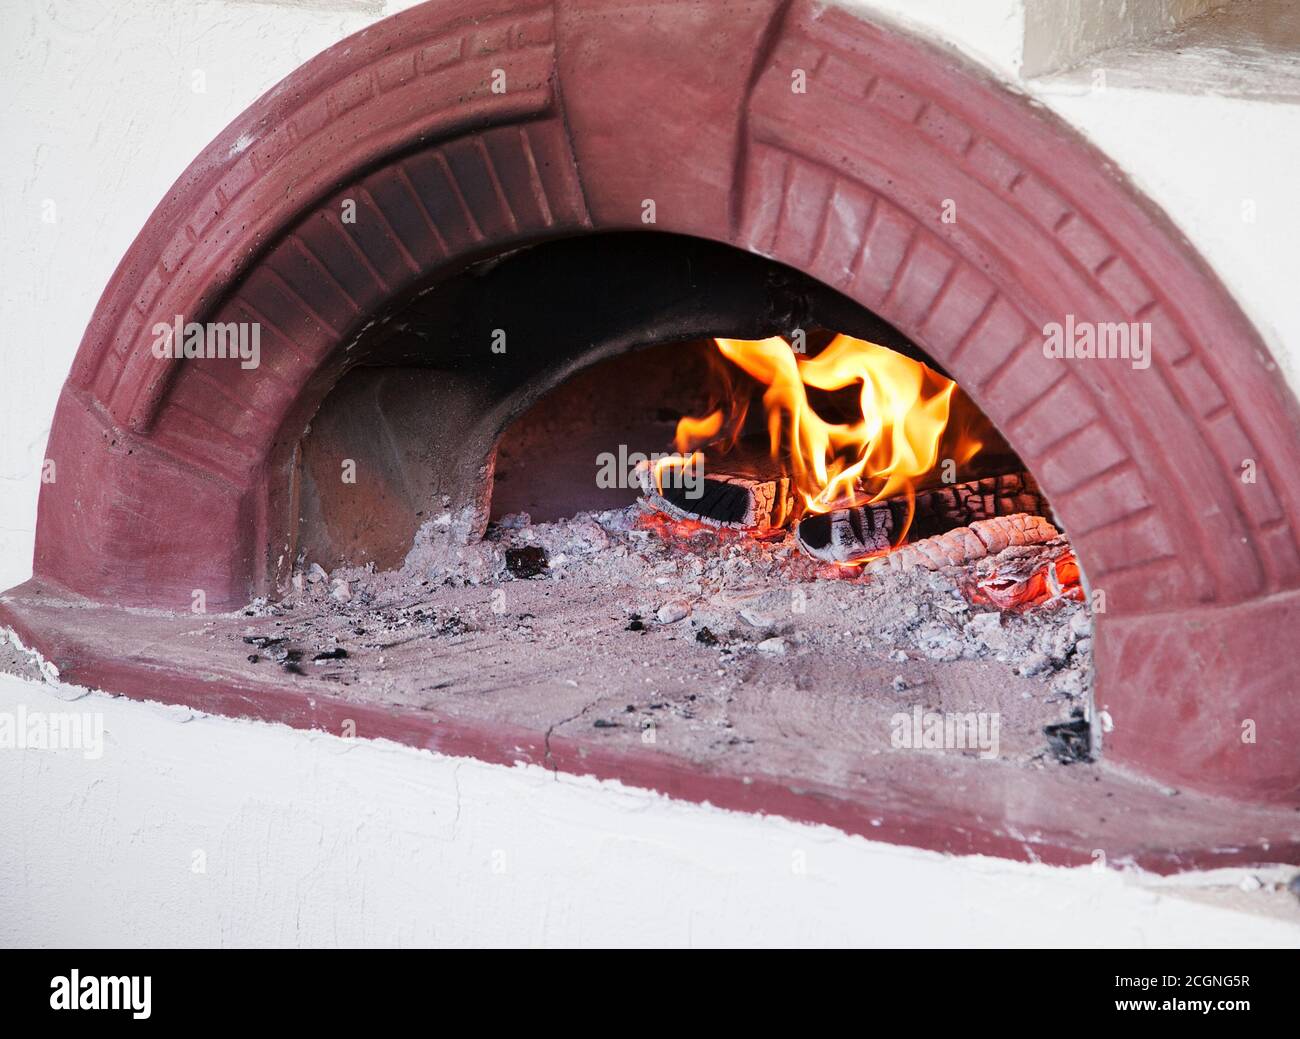 Old Clay Oven in Indian Village Stock Photo - Image of outdoor